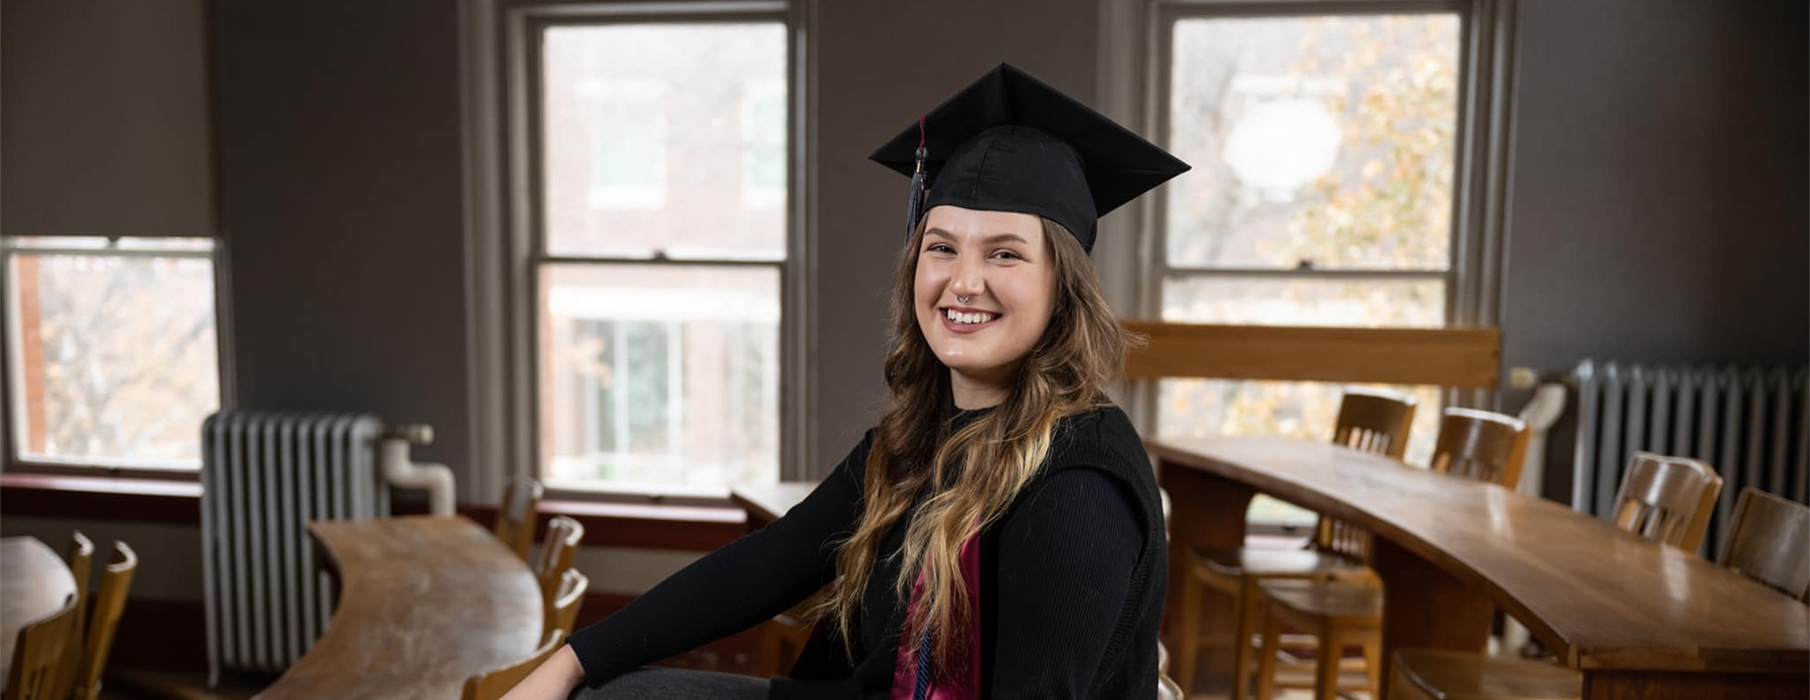 UM graduate Shanna Madison sits on a desk in Rankin Hall wearing her mortar board cap and smiles at the camera